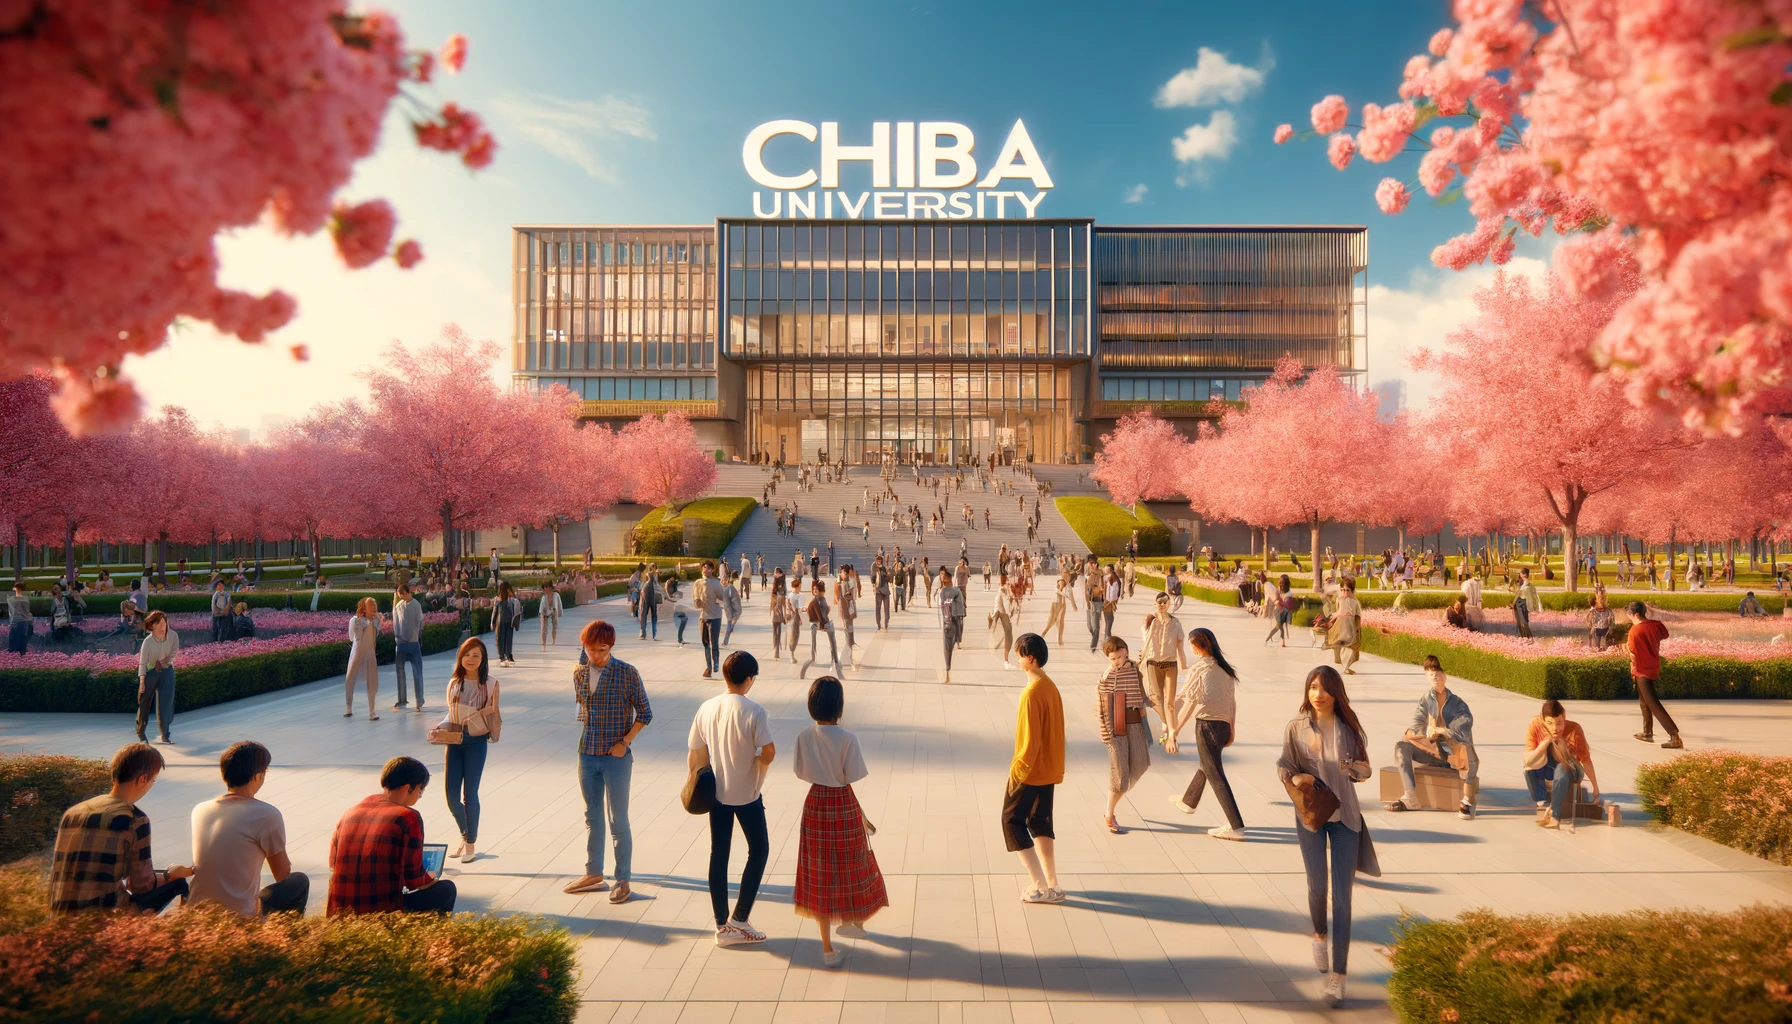 A vibrant university campus scene depicting the popularity of Chiba University in Japan, with the word 'Chiba' prominently displayed in the sky. The image features a large group of diverse students of various Asian descents, casually dressed, walking and chatting among cherry blossoms in full bloom. The university's modern architecture, with sleek glass buildings and landscaped gardens, is visible in the background. The scene is lively, with students engaging in outdoor activities like reading, using laptops, and group discussions, showcasing a bustling academic environment.